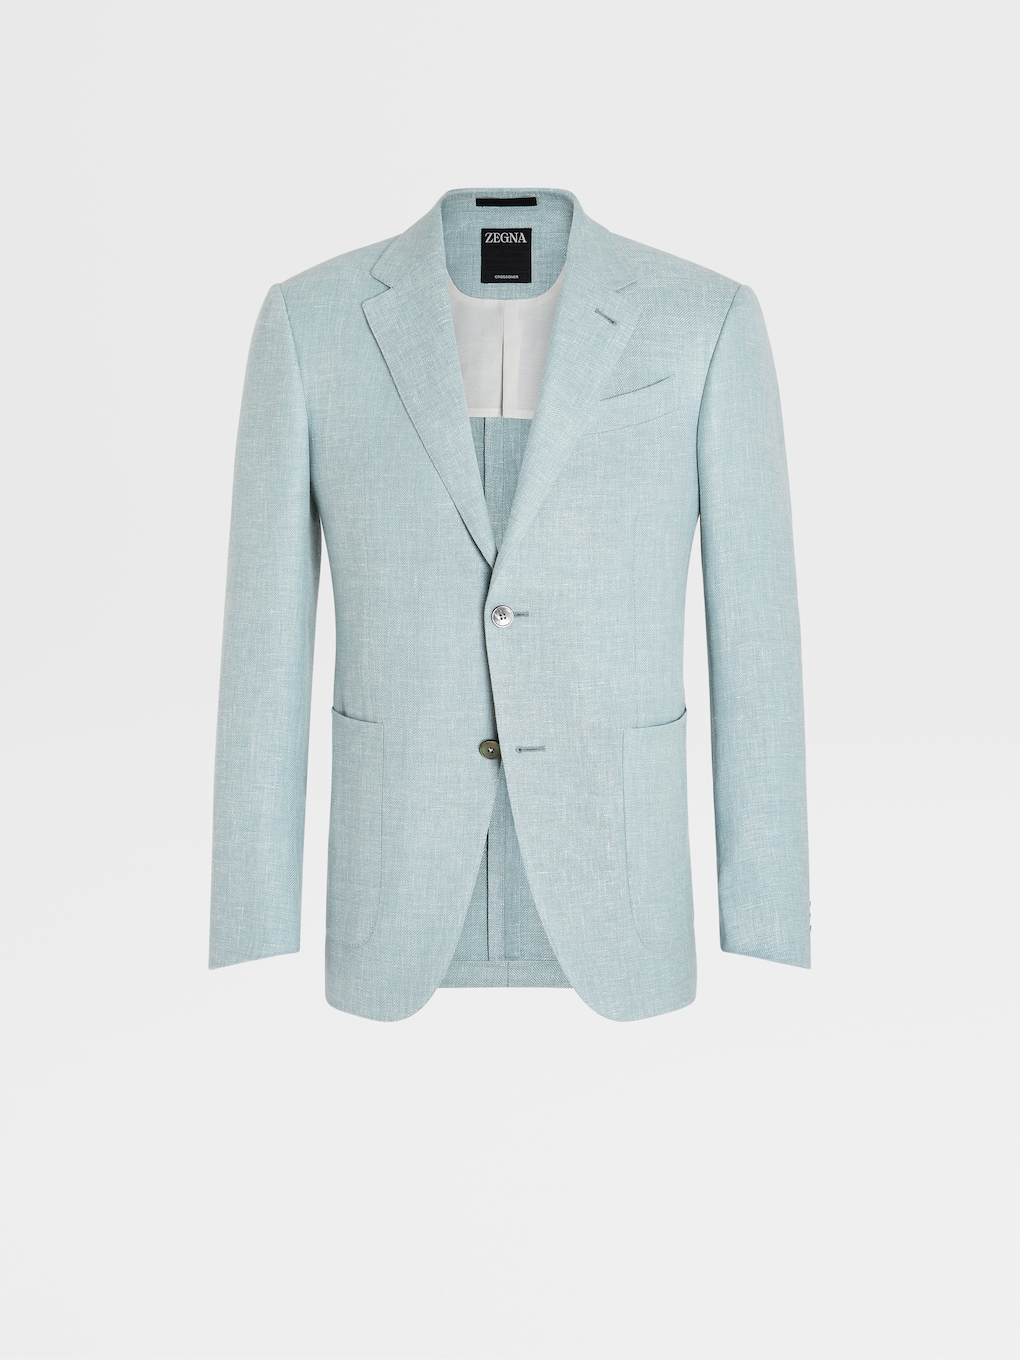 Aqua Green Microstructured Crossover Linen and Wool Blend Fairway ...